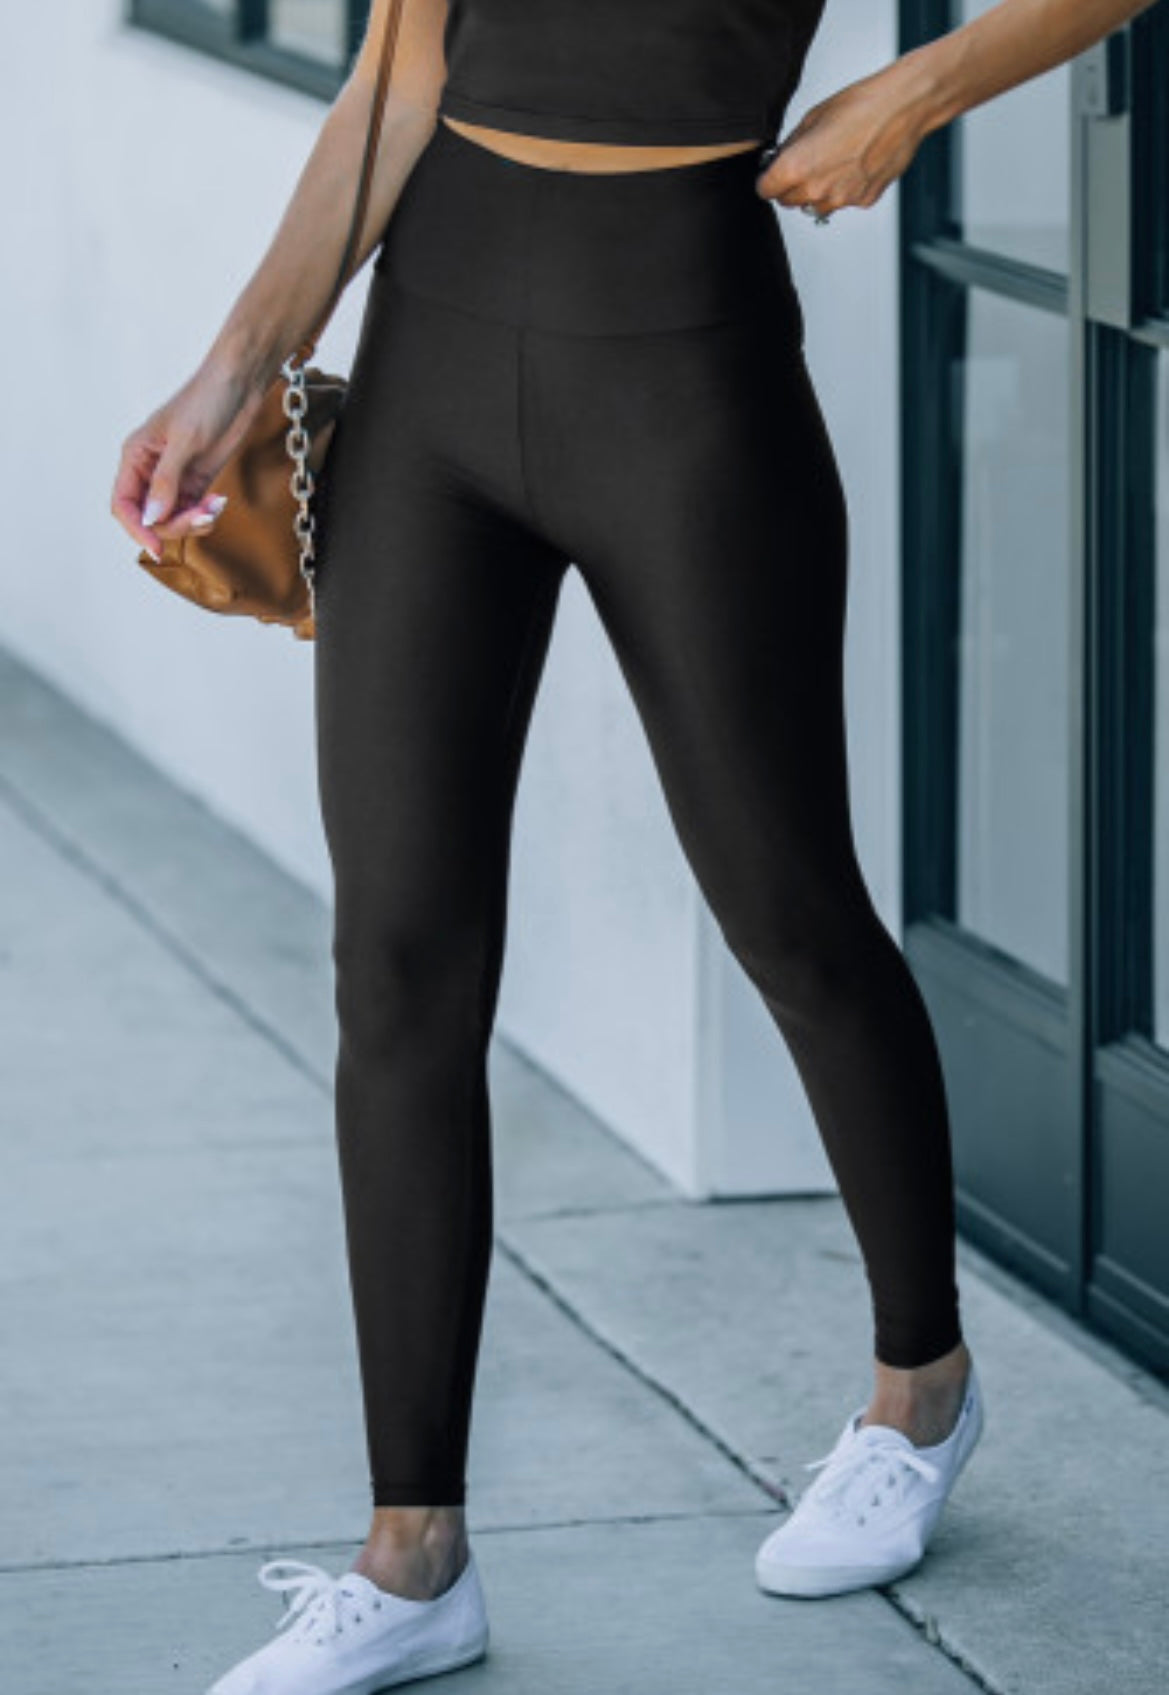 Spanx leather dupes